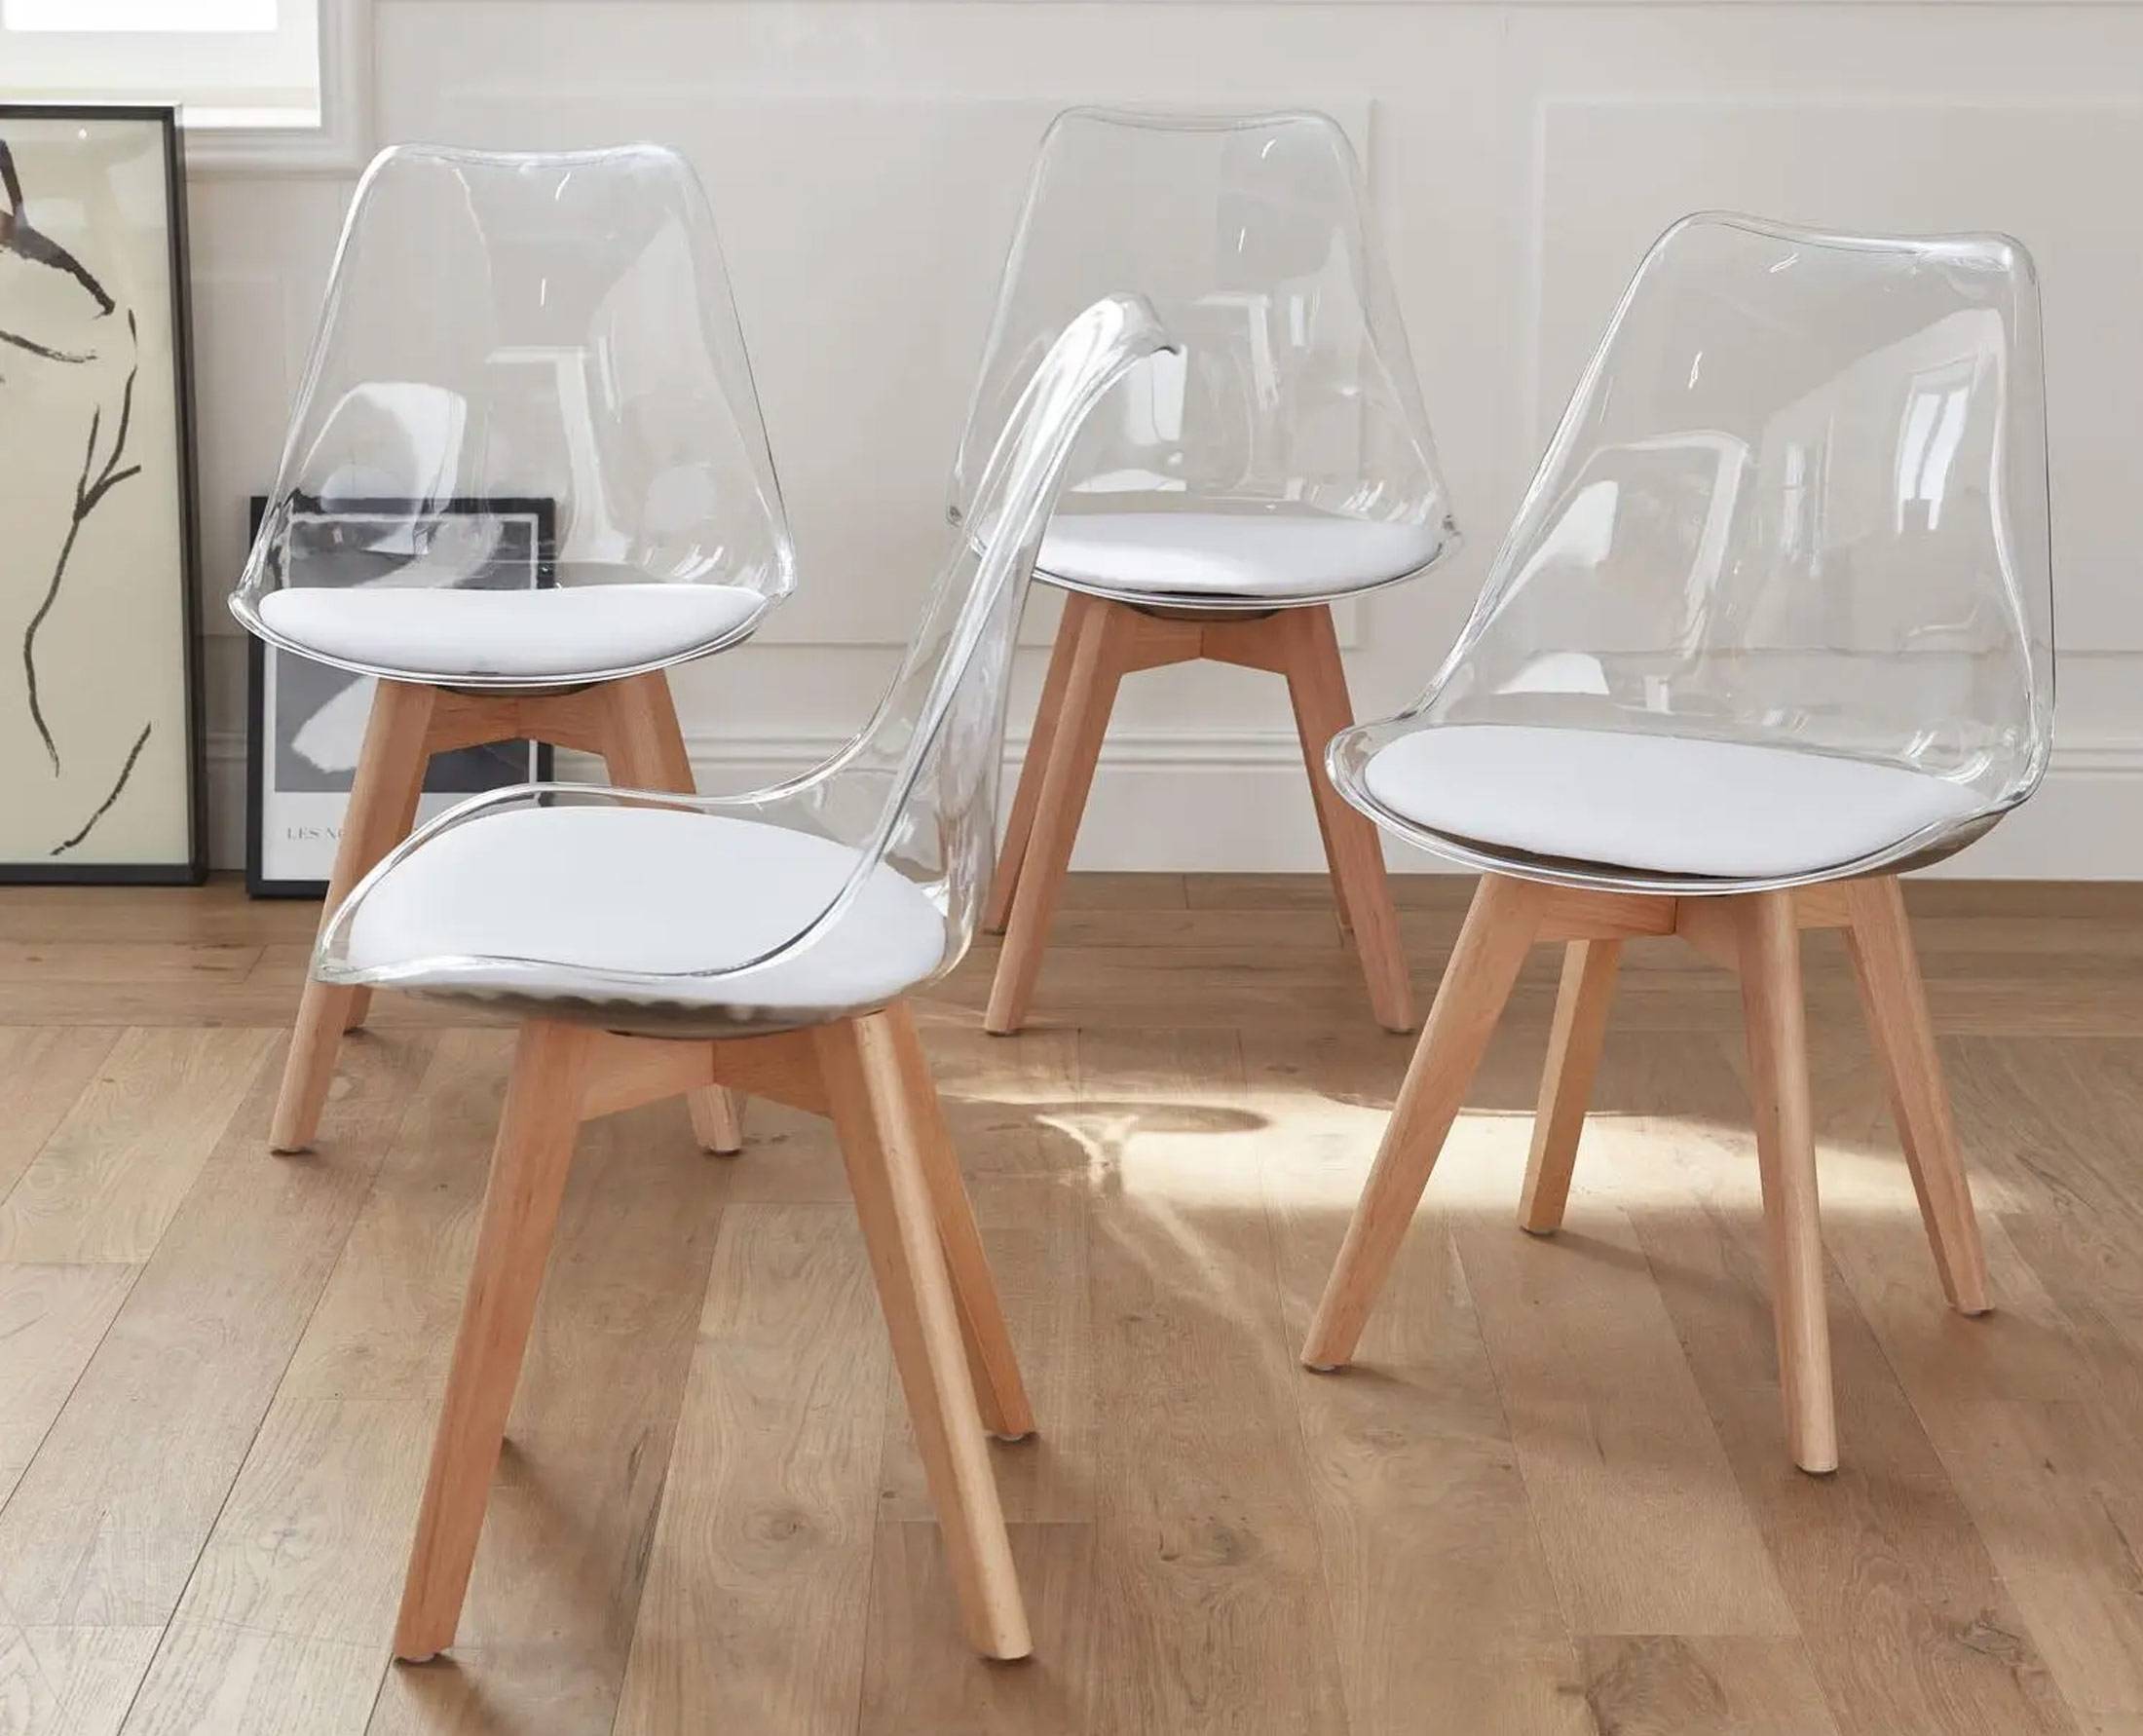 Nos chaises scandinaves